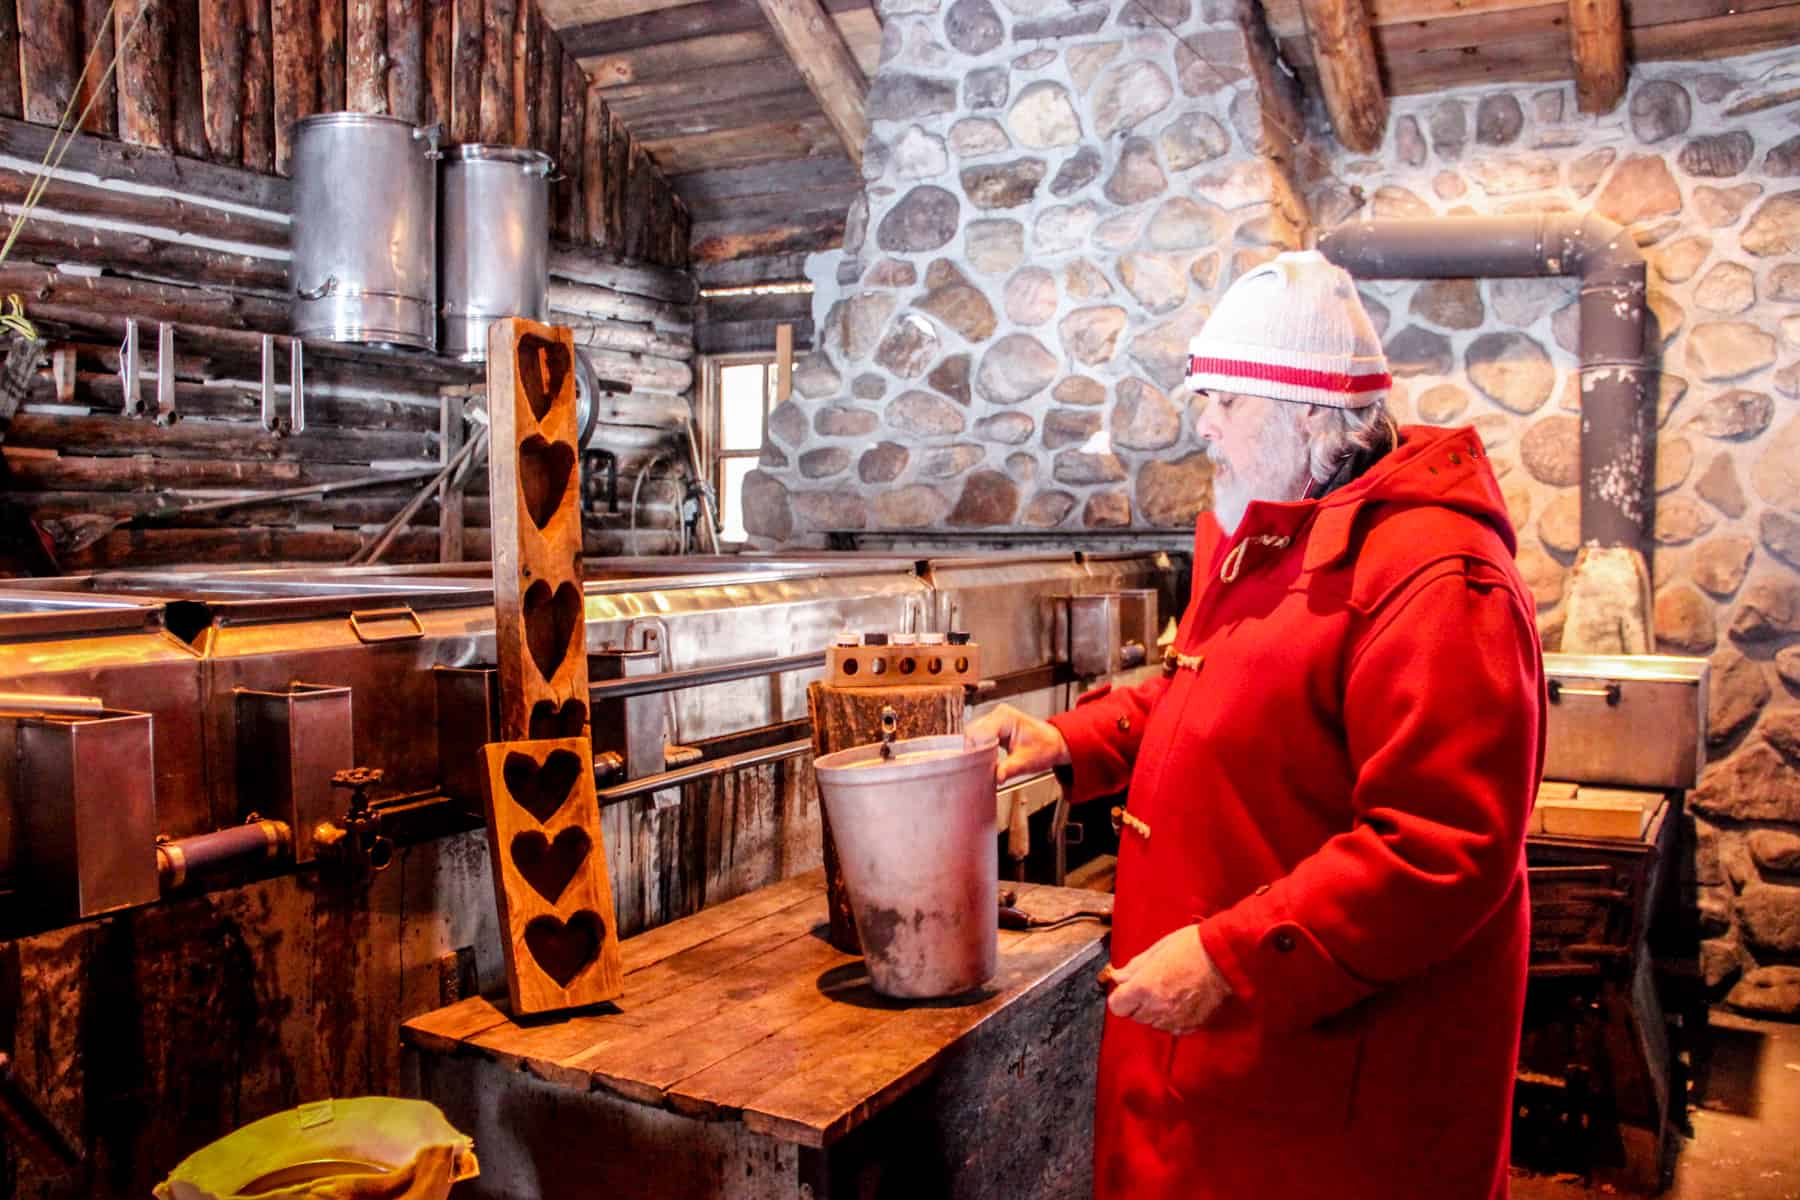 The owner of the Sucrerie de la Montagne sugar shack, dressed in a red coat and white hat, stands within a wood and stone storage building holding a metal bucket on maple syrup. 